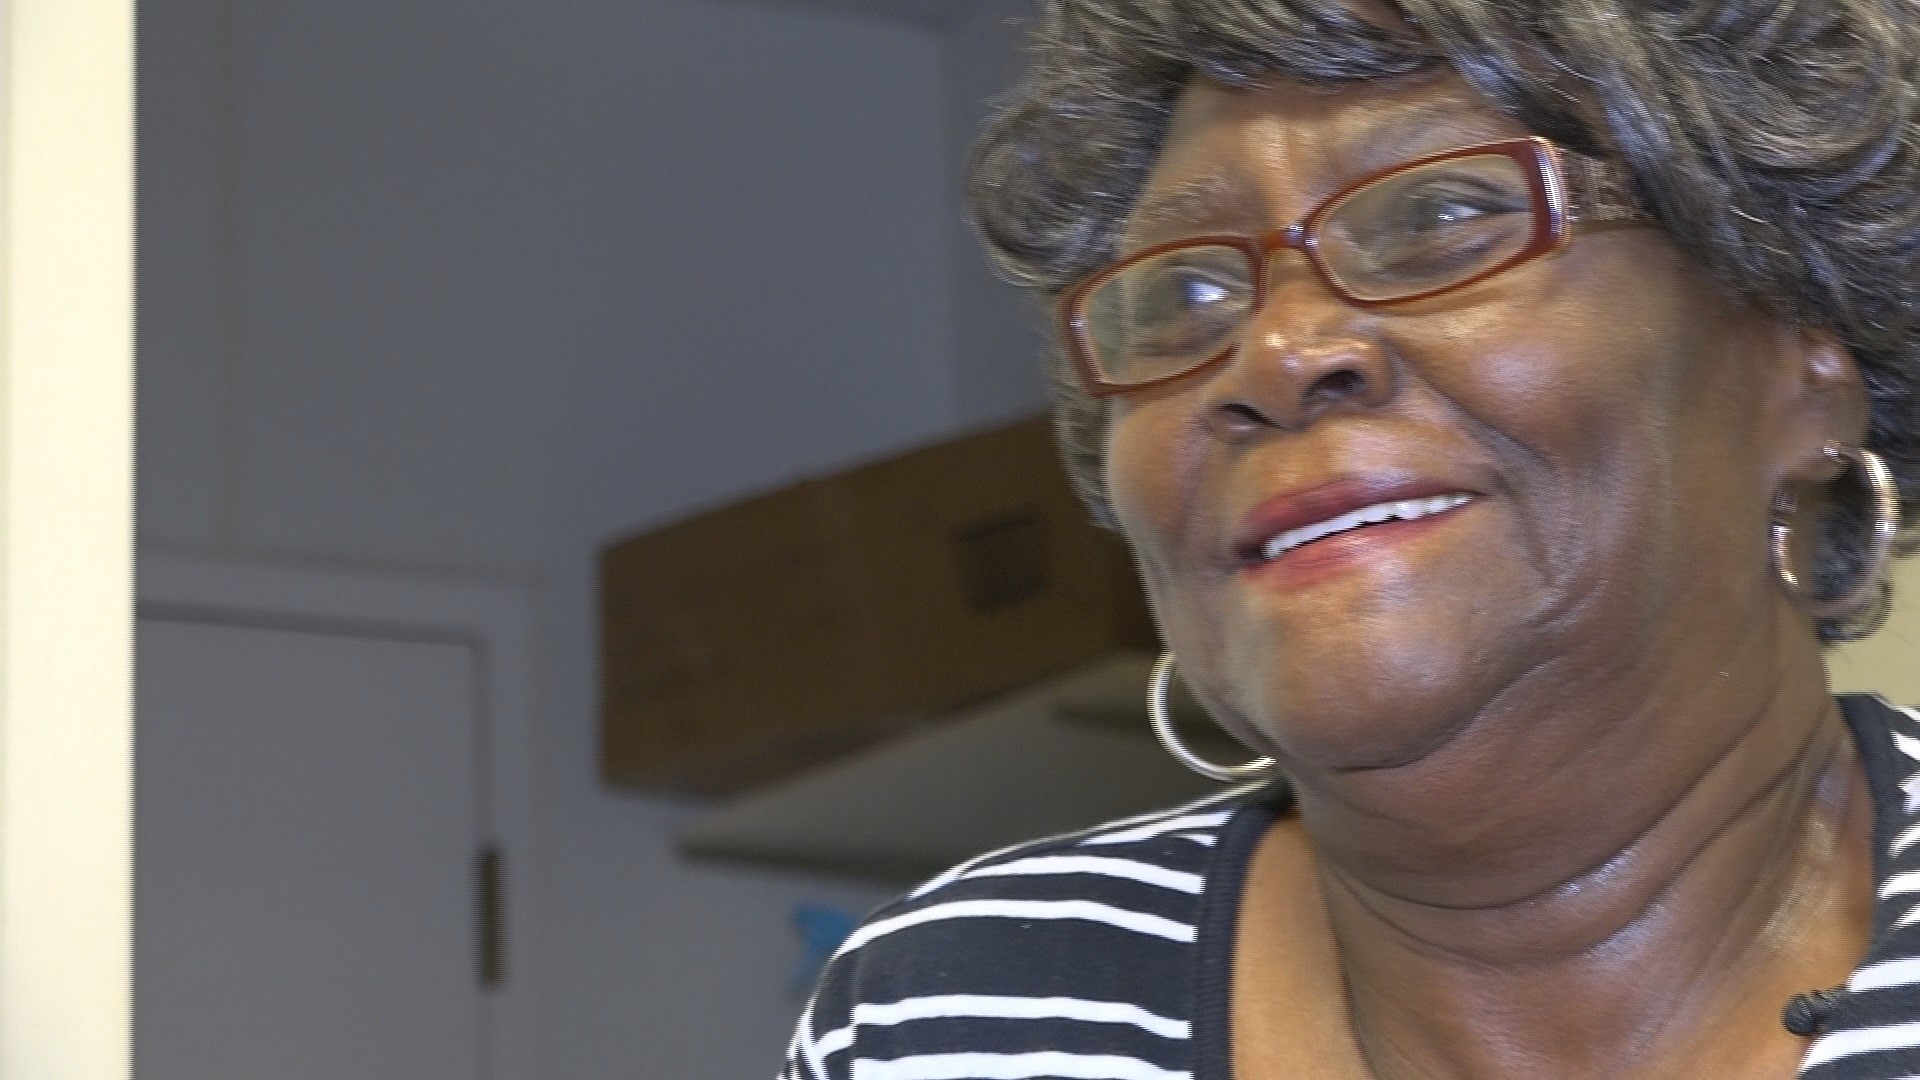 Geraldine Singleton has been making free Thanksgiving and Christmas meals for nearly 40 years. Now, she's preparing a feast for New Year's.